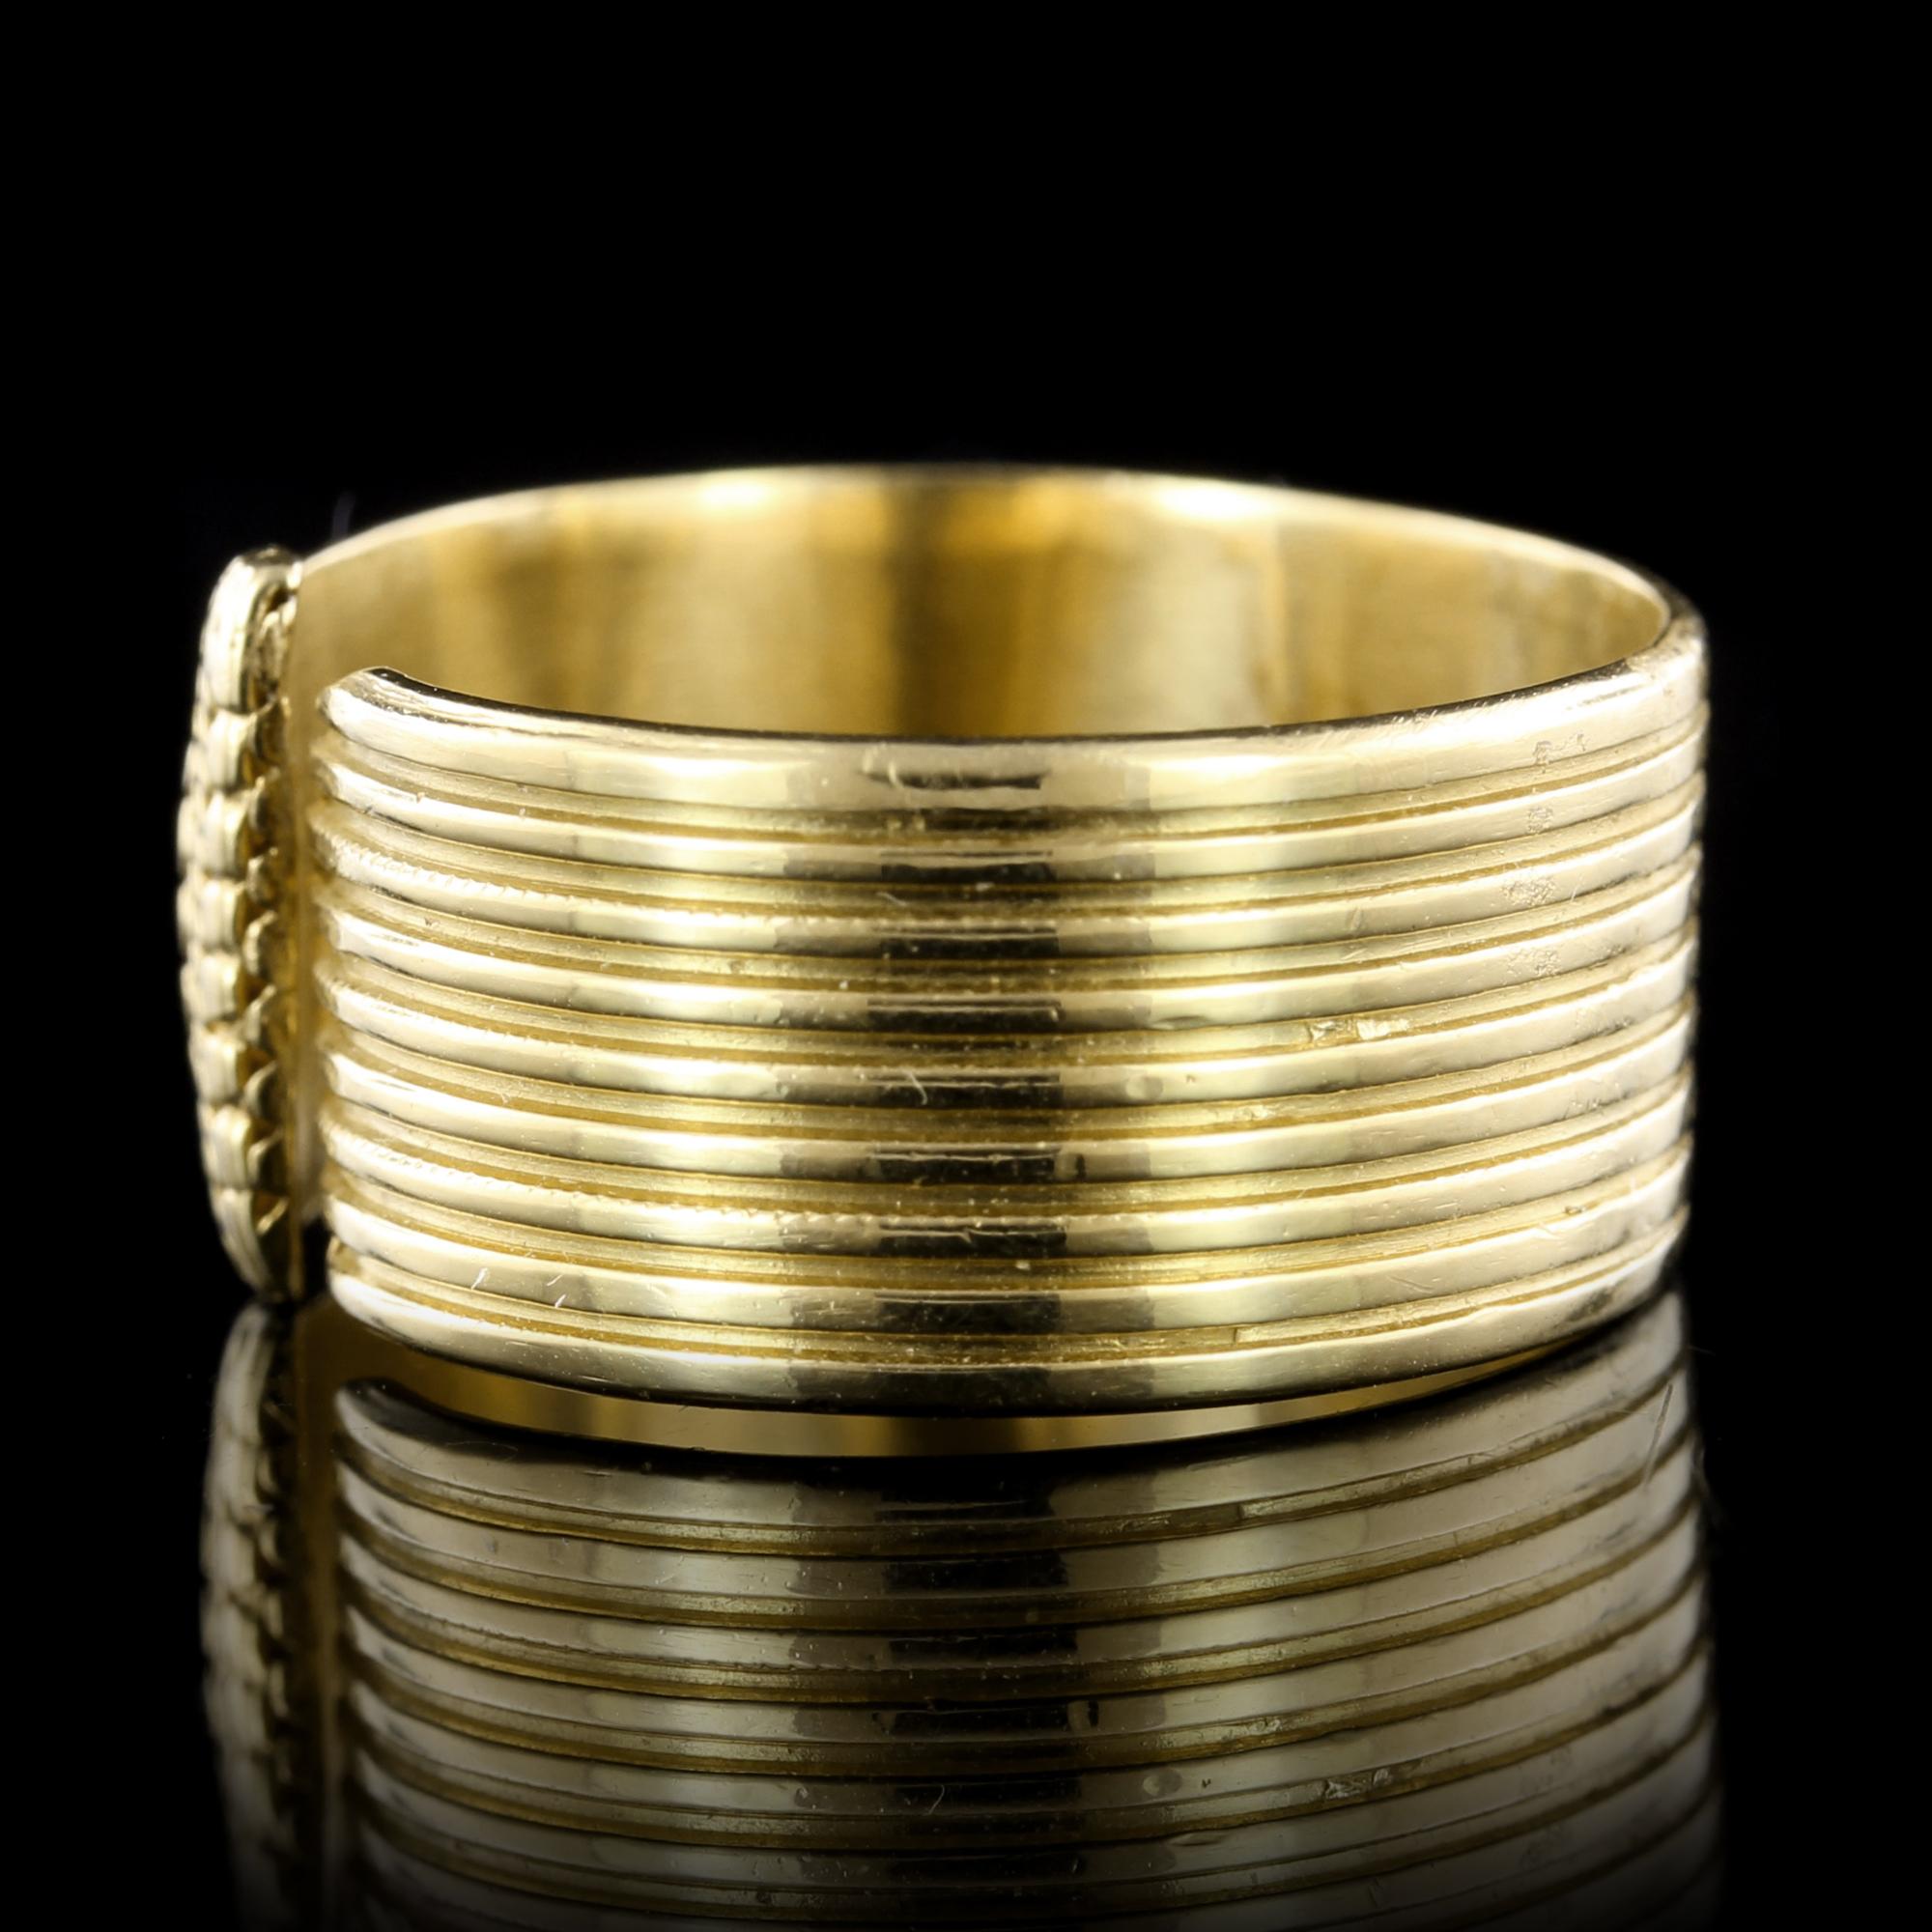 Lalaounis 22K Yellow Gold Band, Greece. The band is adjustable, size 8.